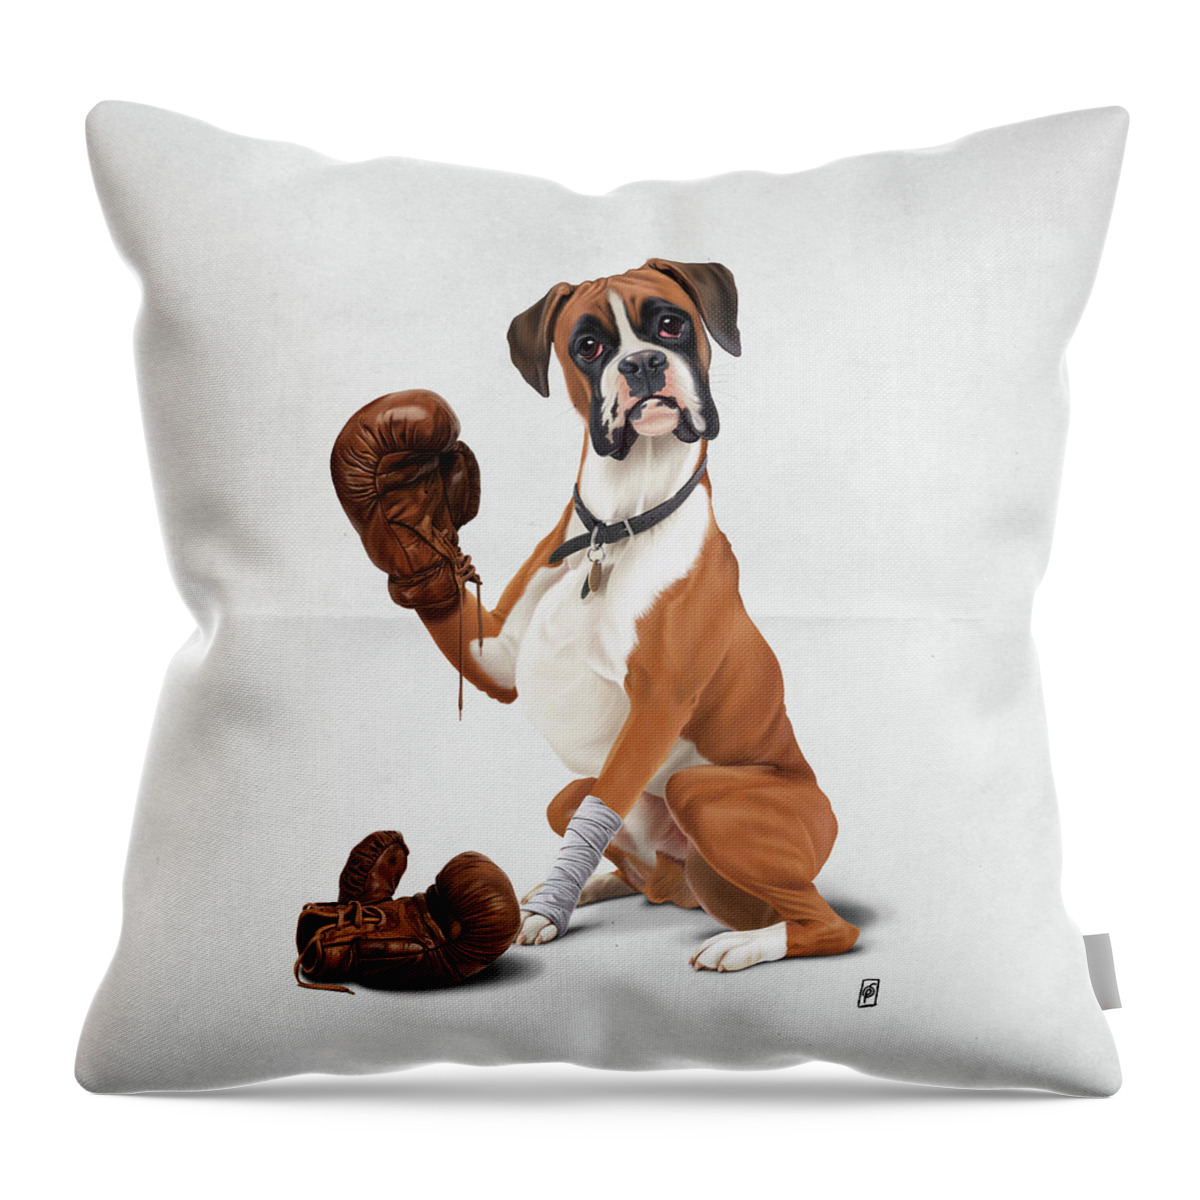 Illustration Throw Pillow featuring the digital art The Boxer Wordless by Rob Snow